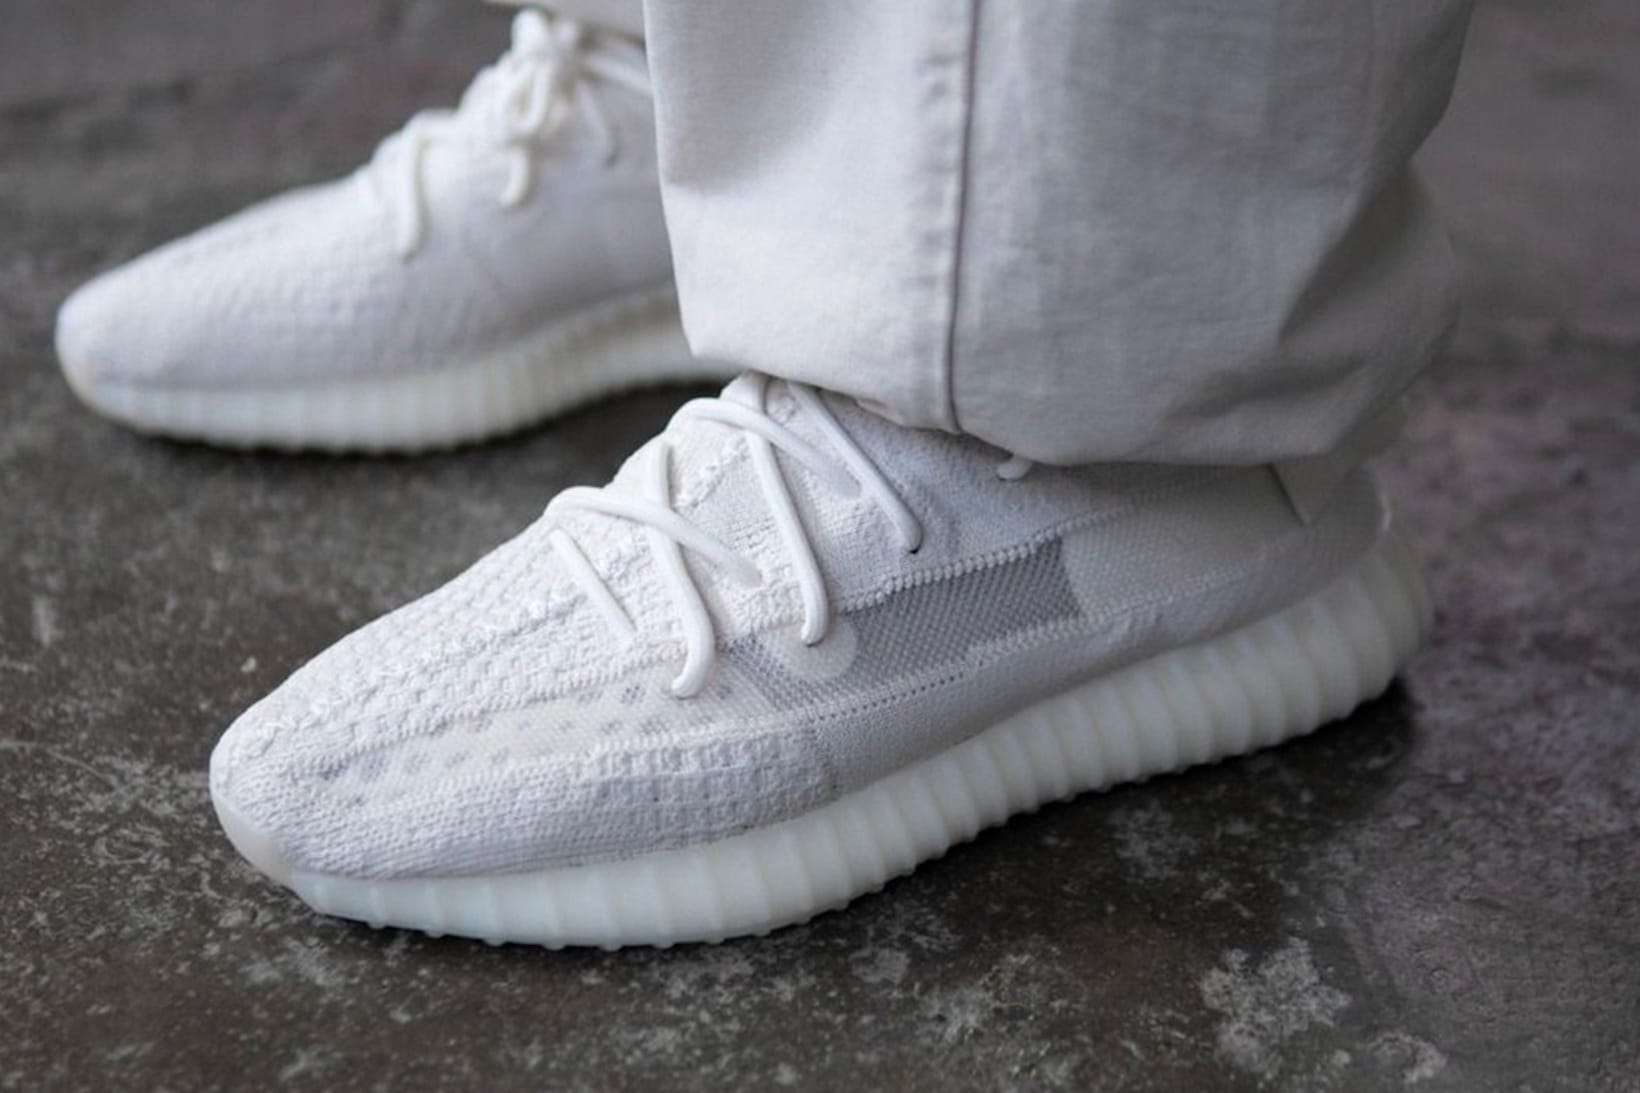 Thieves Steal adidas Yeezy Boost 350 V2 Cream White Delivery |  SneakerNews.com